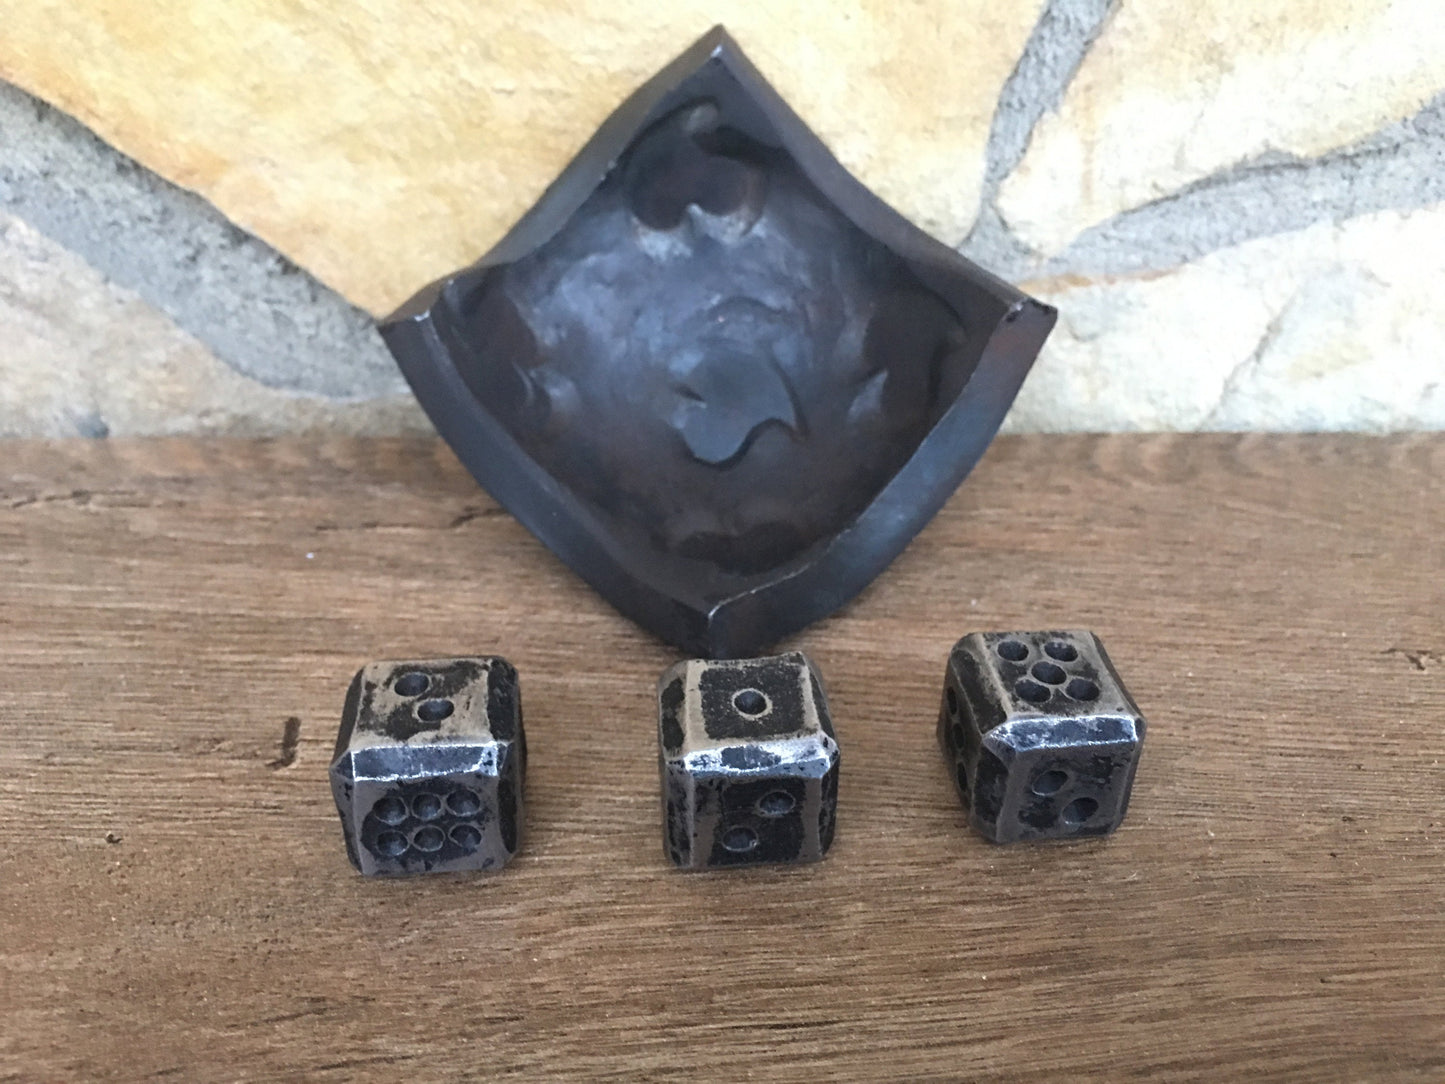 Iron dices, set of dices, iron dice, steel dice, custom dice, pair of dices,iron gifts, axe,gaming dice,role playing games,tabletop dice box